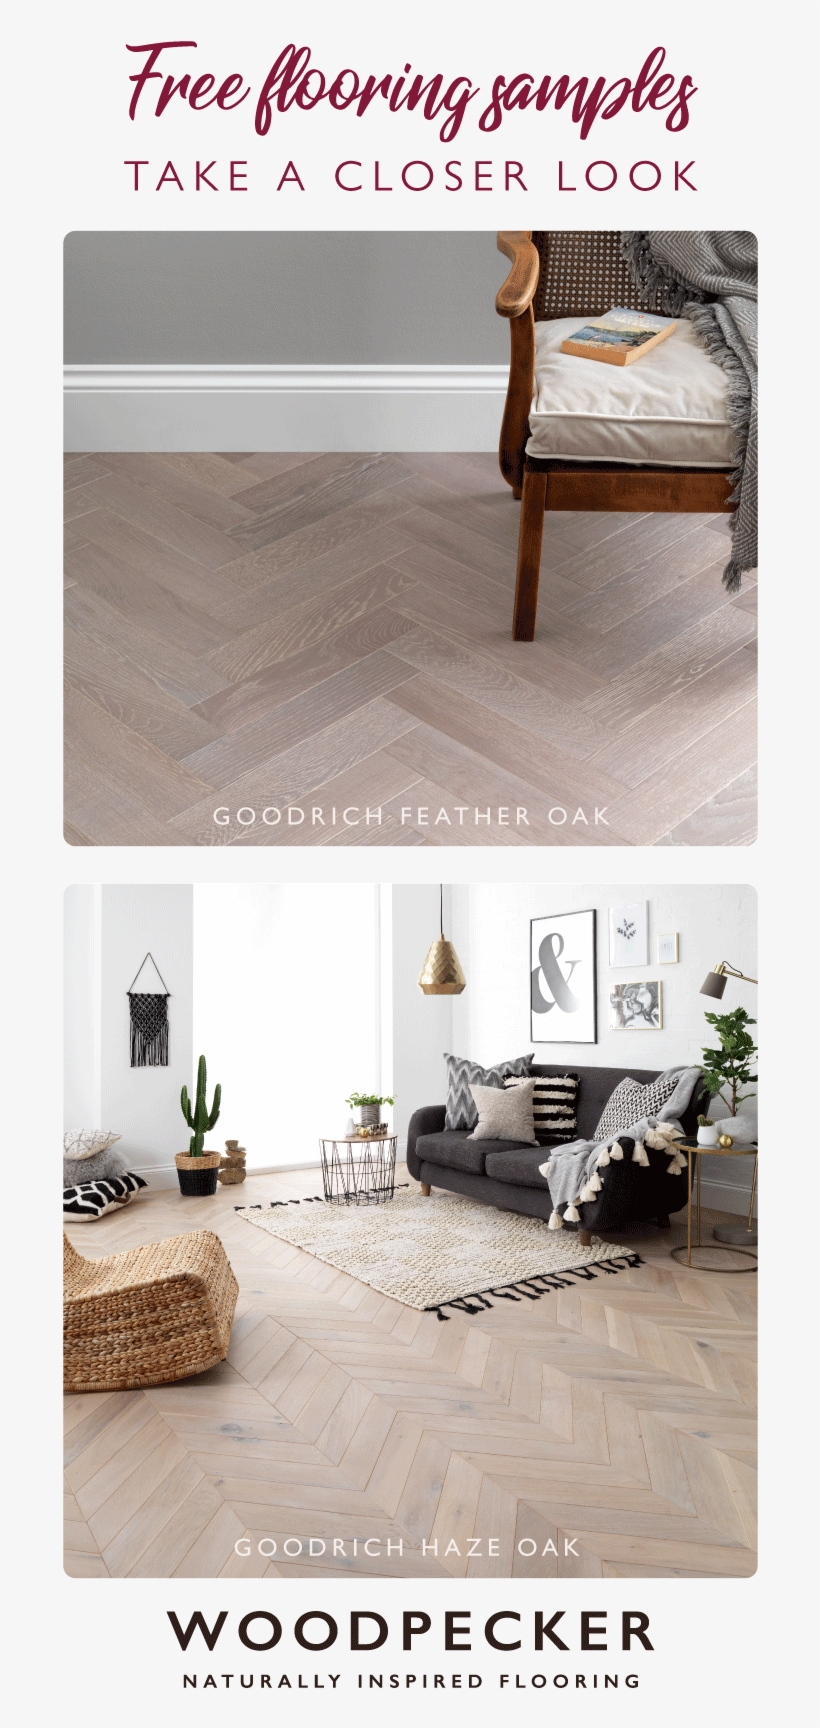 Take A Closer Look And Discover Your Dream Wood Floor - Parquet Style Flooring, transparent png #9710642